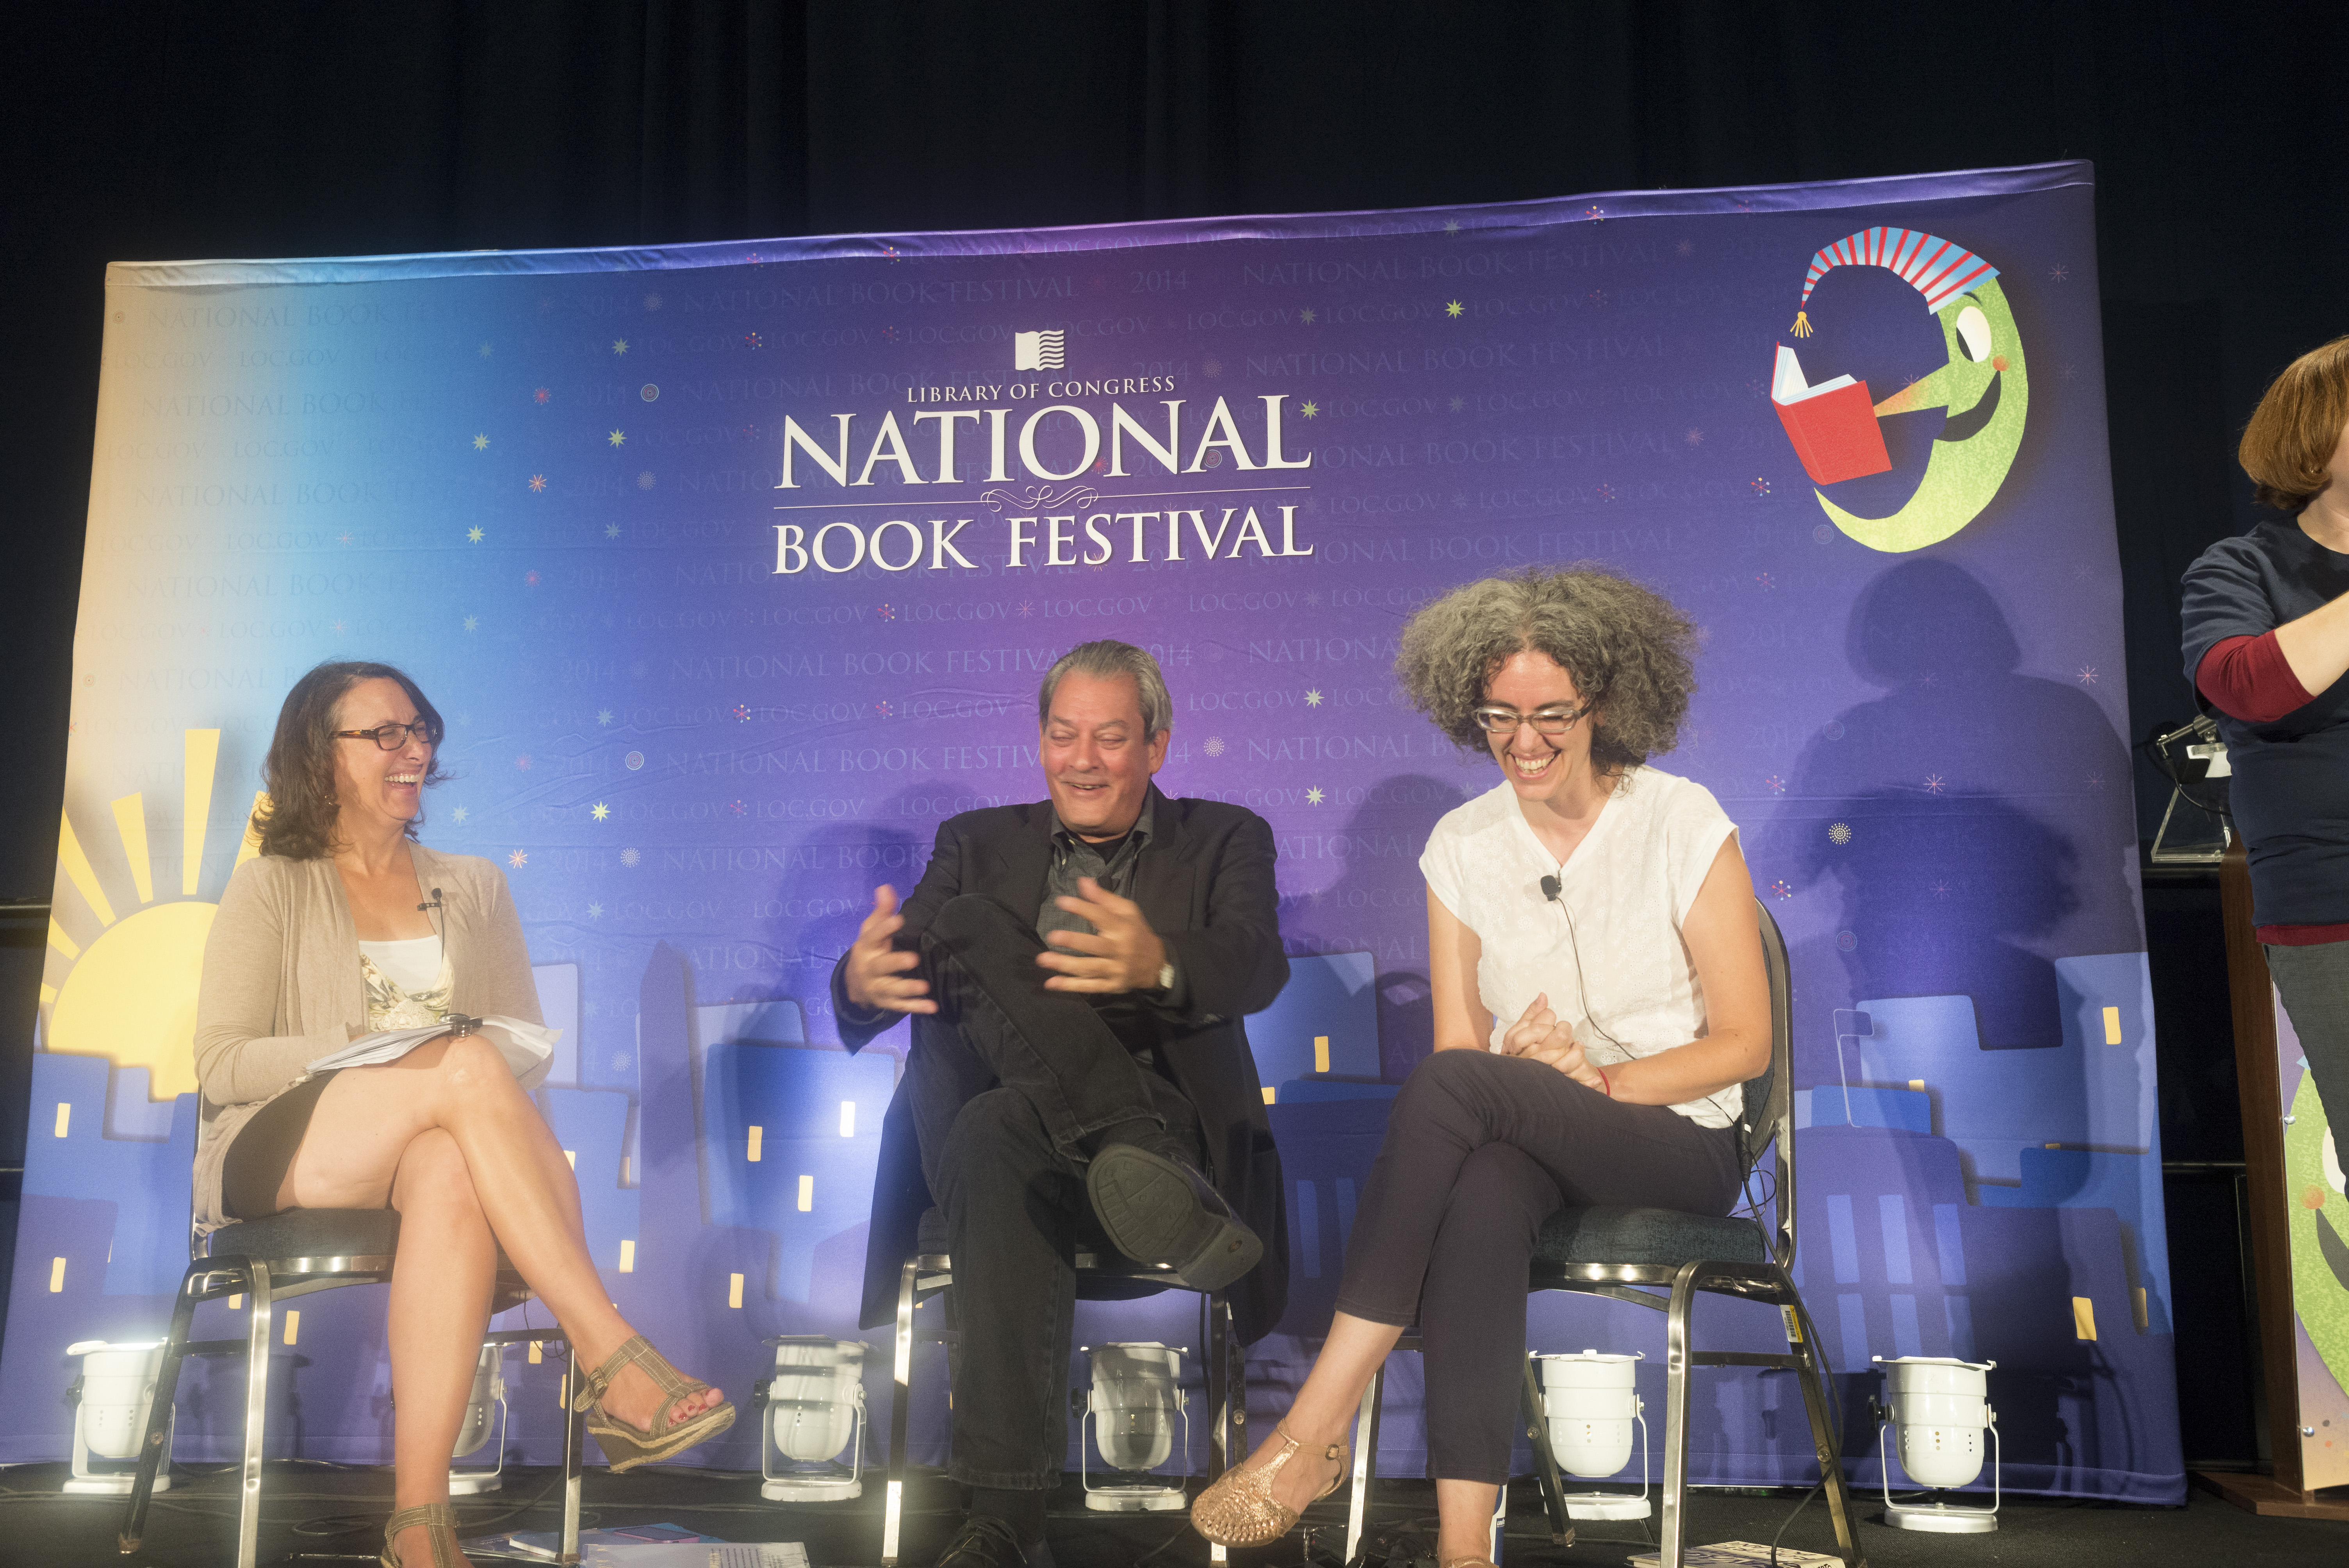 NEA Literature Director on stage smiling and laughing with NEA Creative Writing Fellow Paul Auster and NEA Literature Translation Fellow Natasha Wimmer.